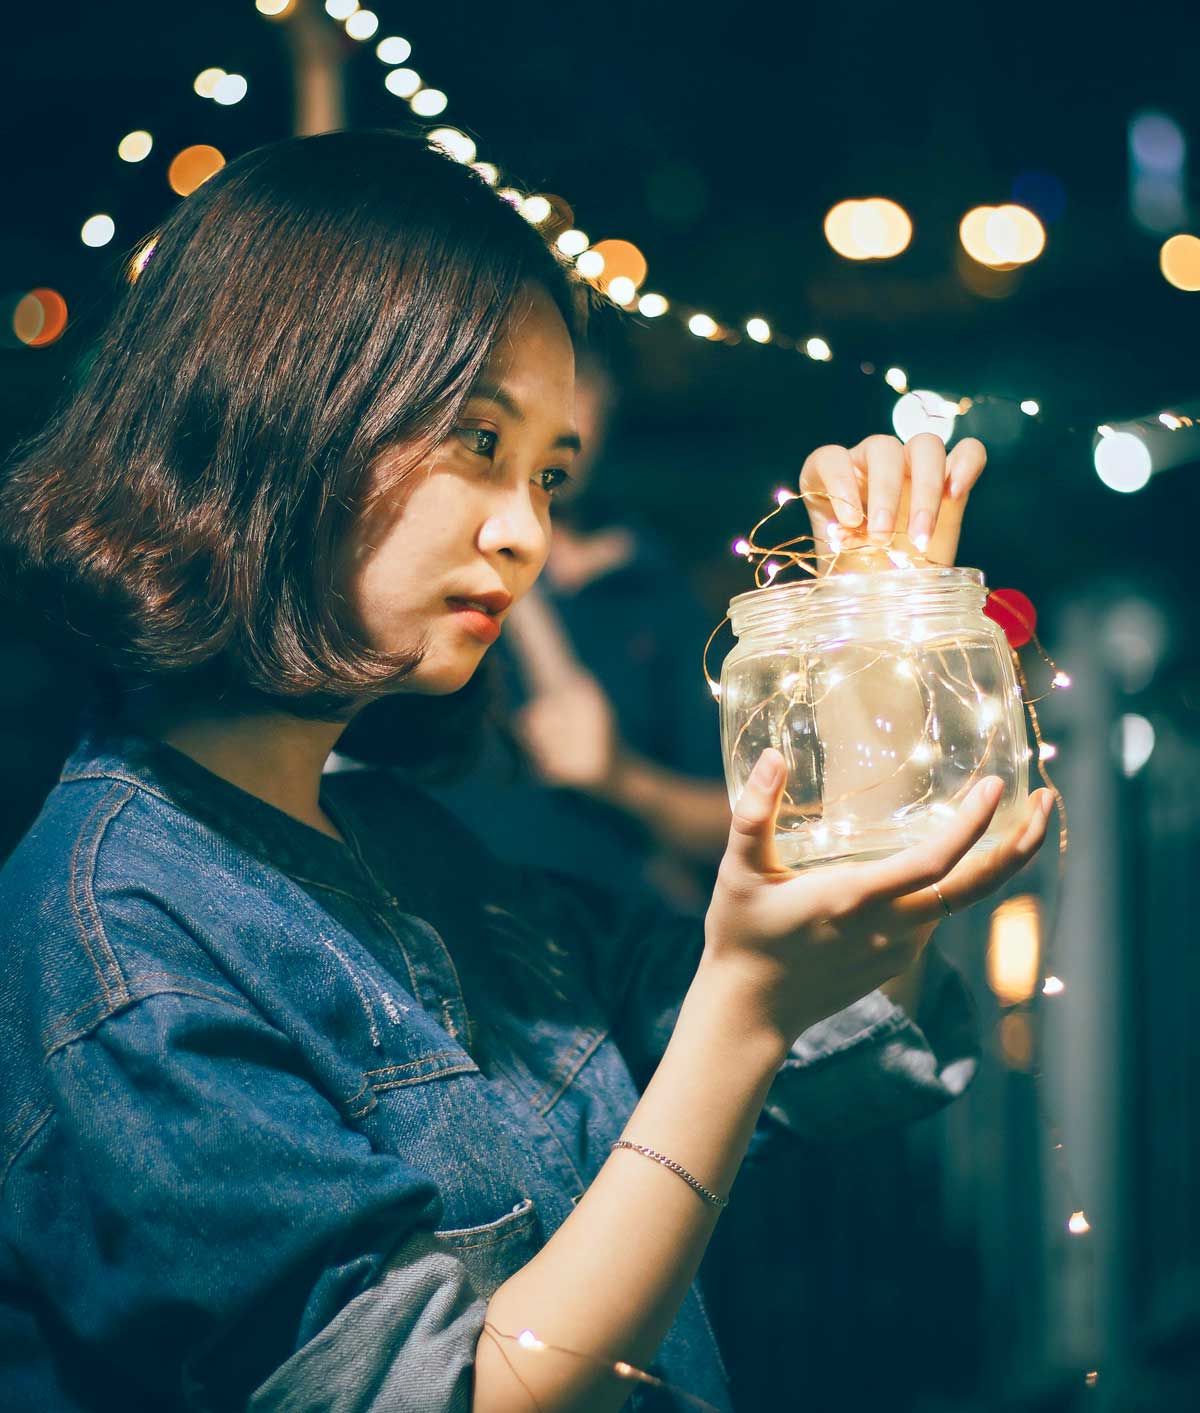 A woman holding a jar with lights inside, surrounded by a bokeh effect from additional lights in the background.